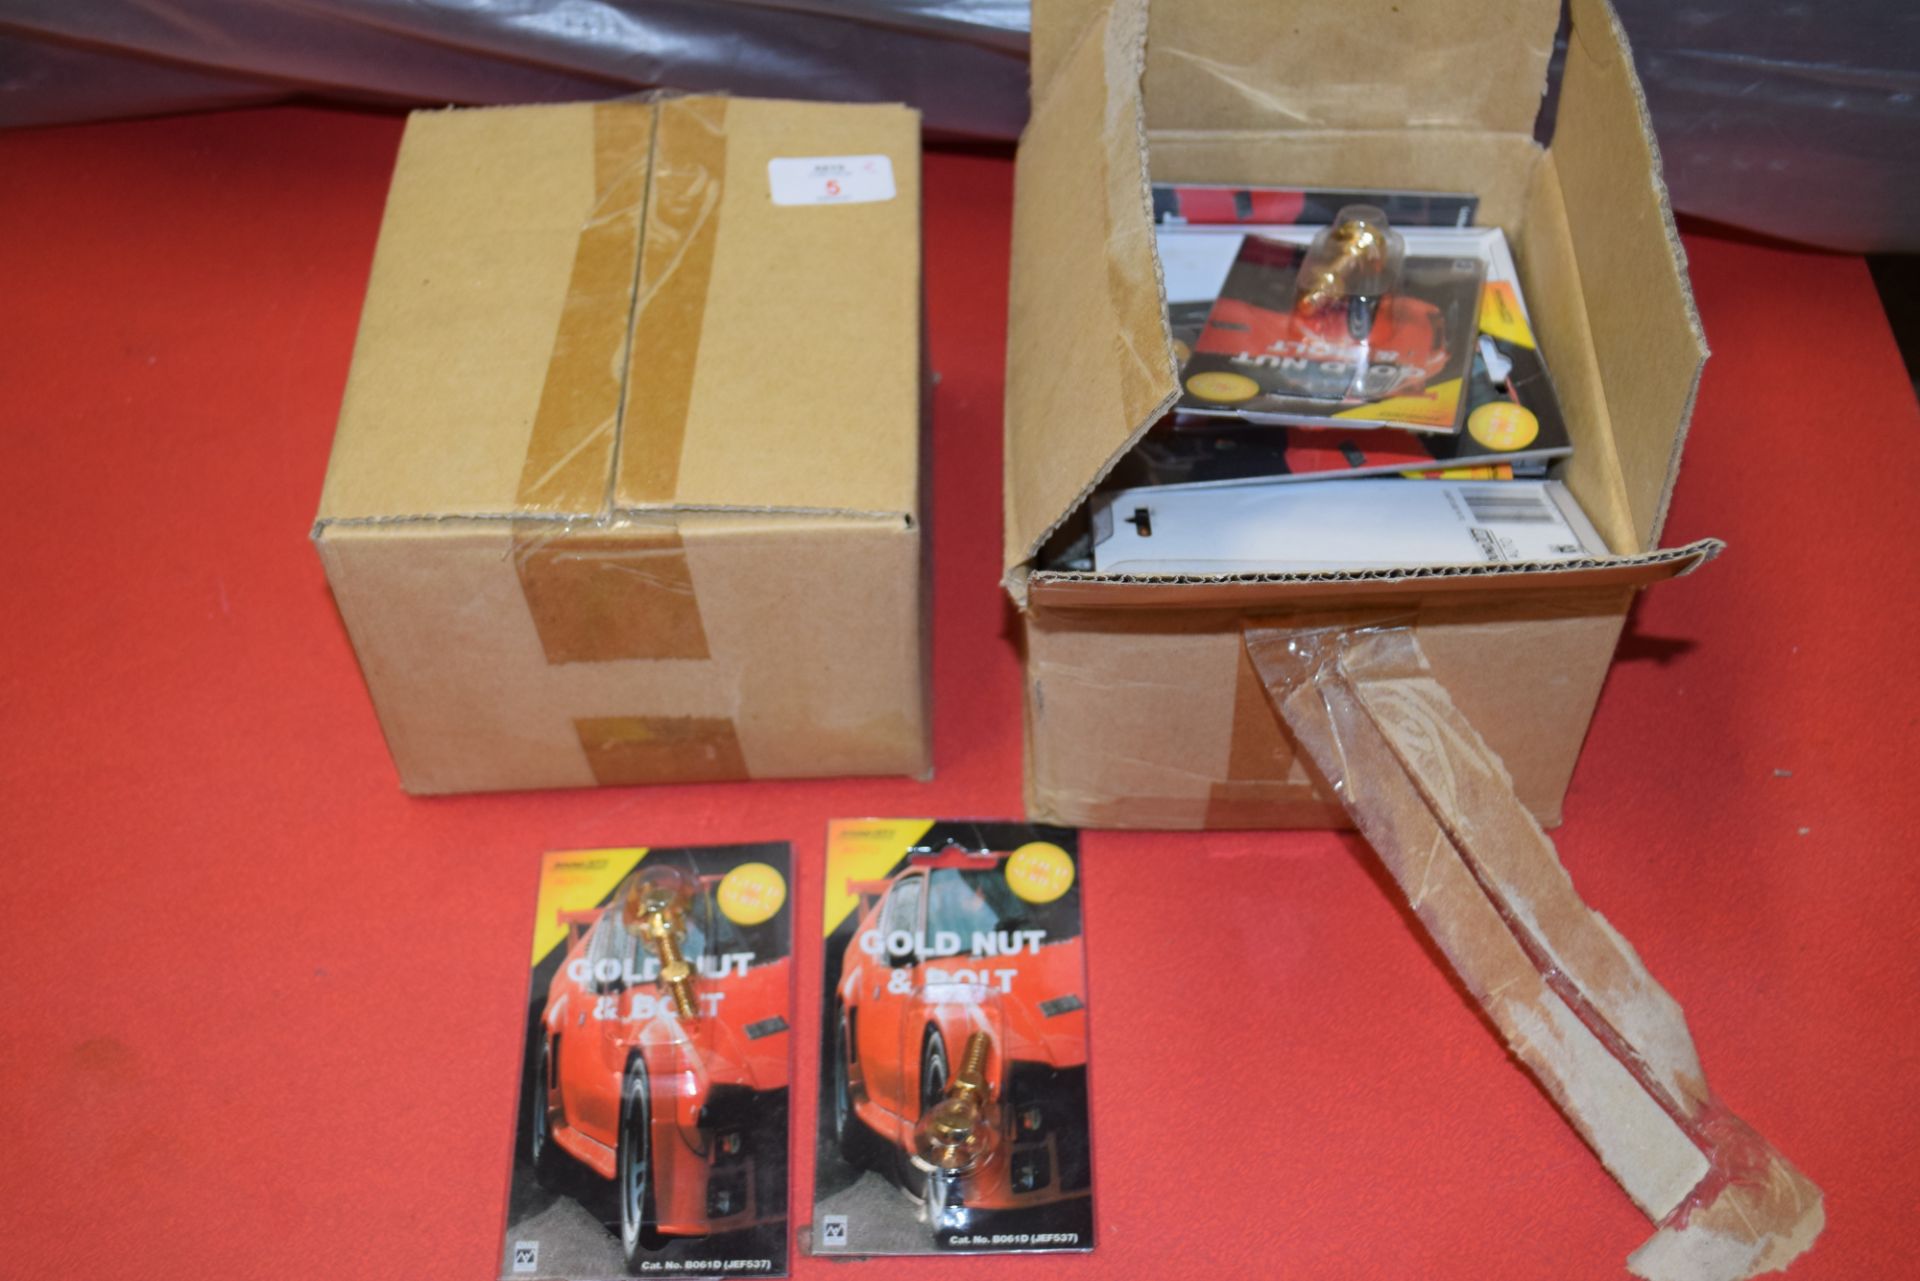 TWO BOXES CONTAINING SOUND LAB AUTO GOLD NUT AND BOLT CONNECTORS, APPROX 20 PIECES PER BOX - Image 2 of 3